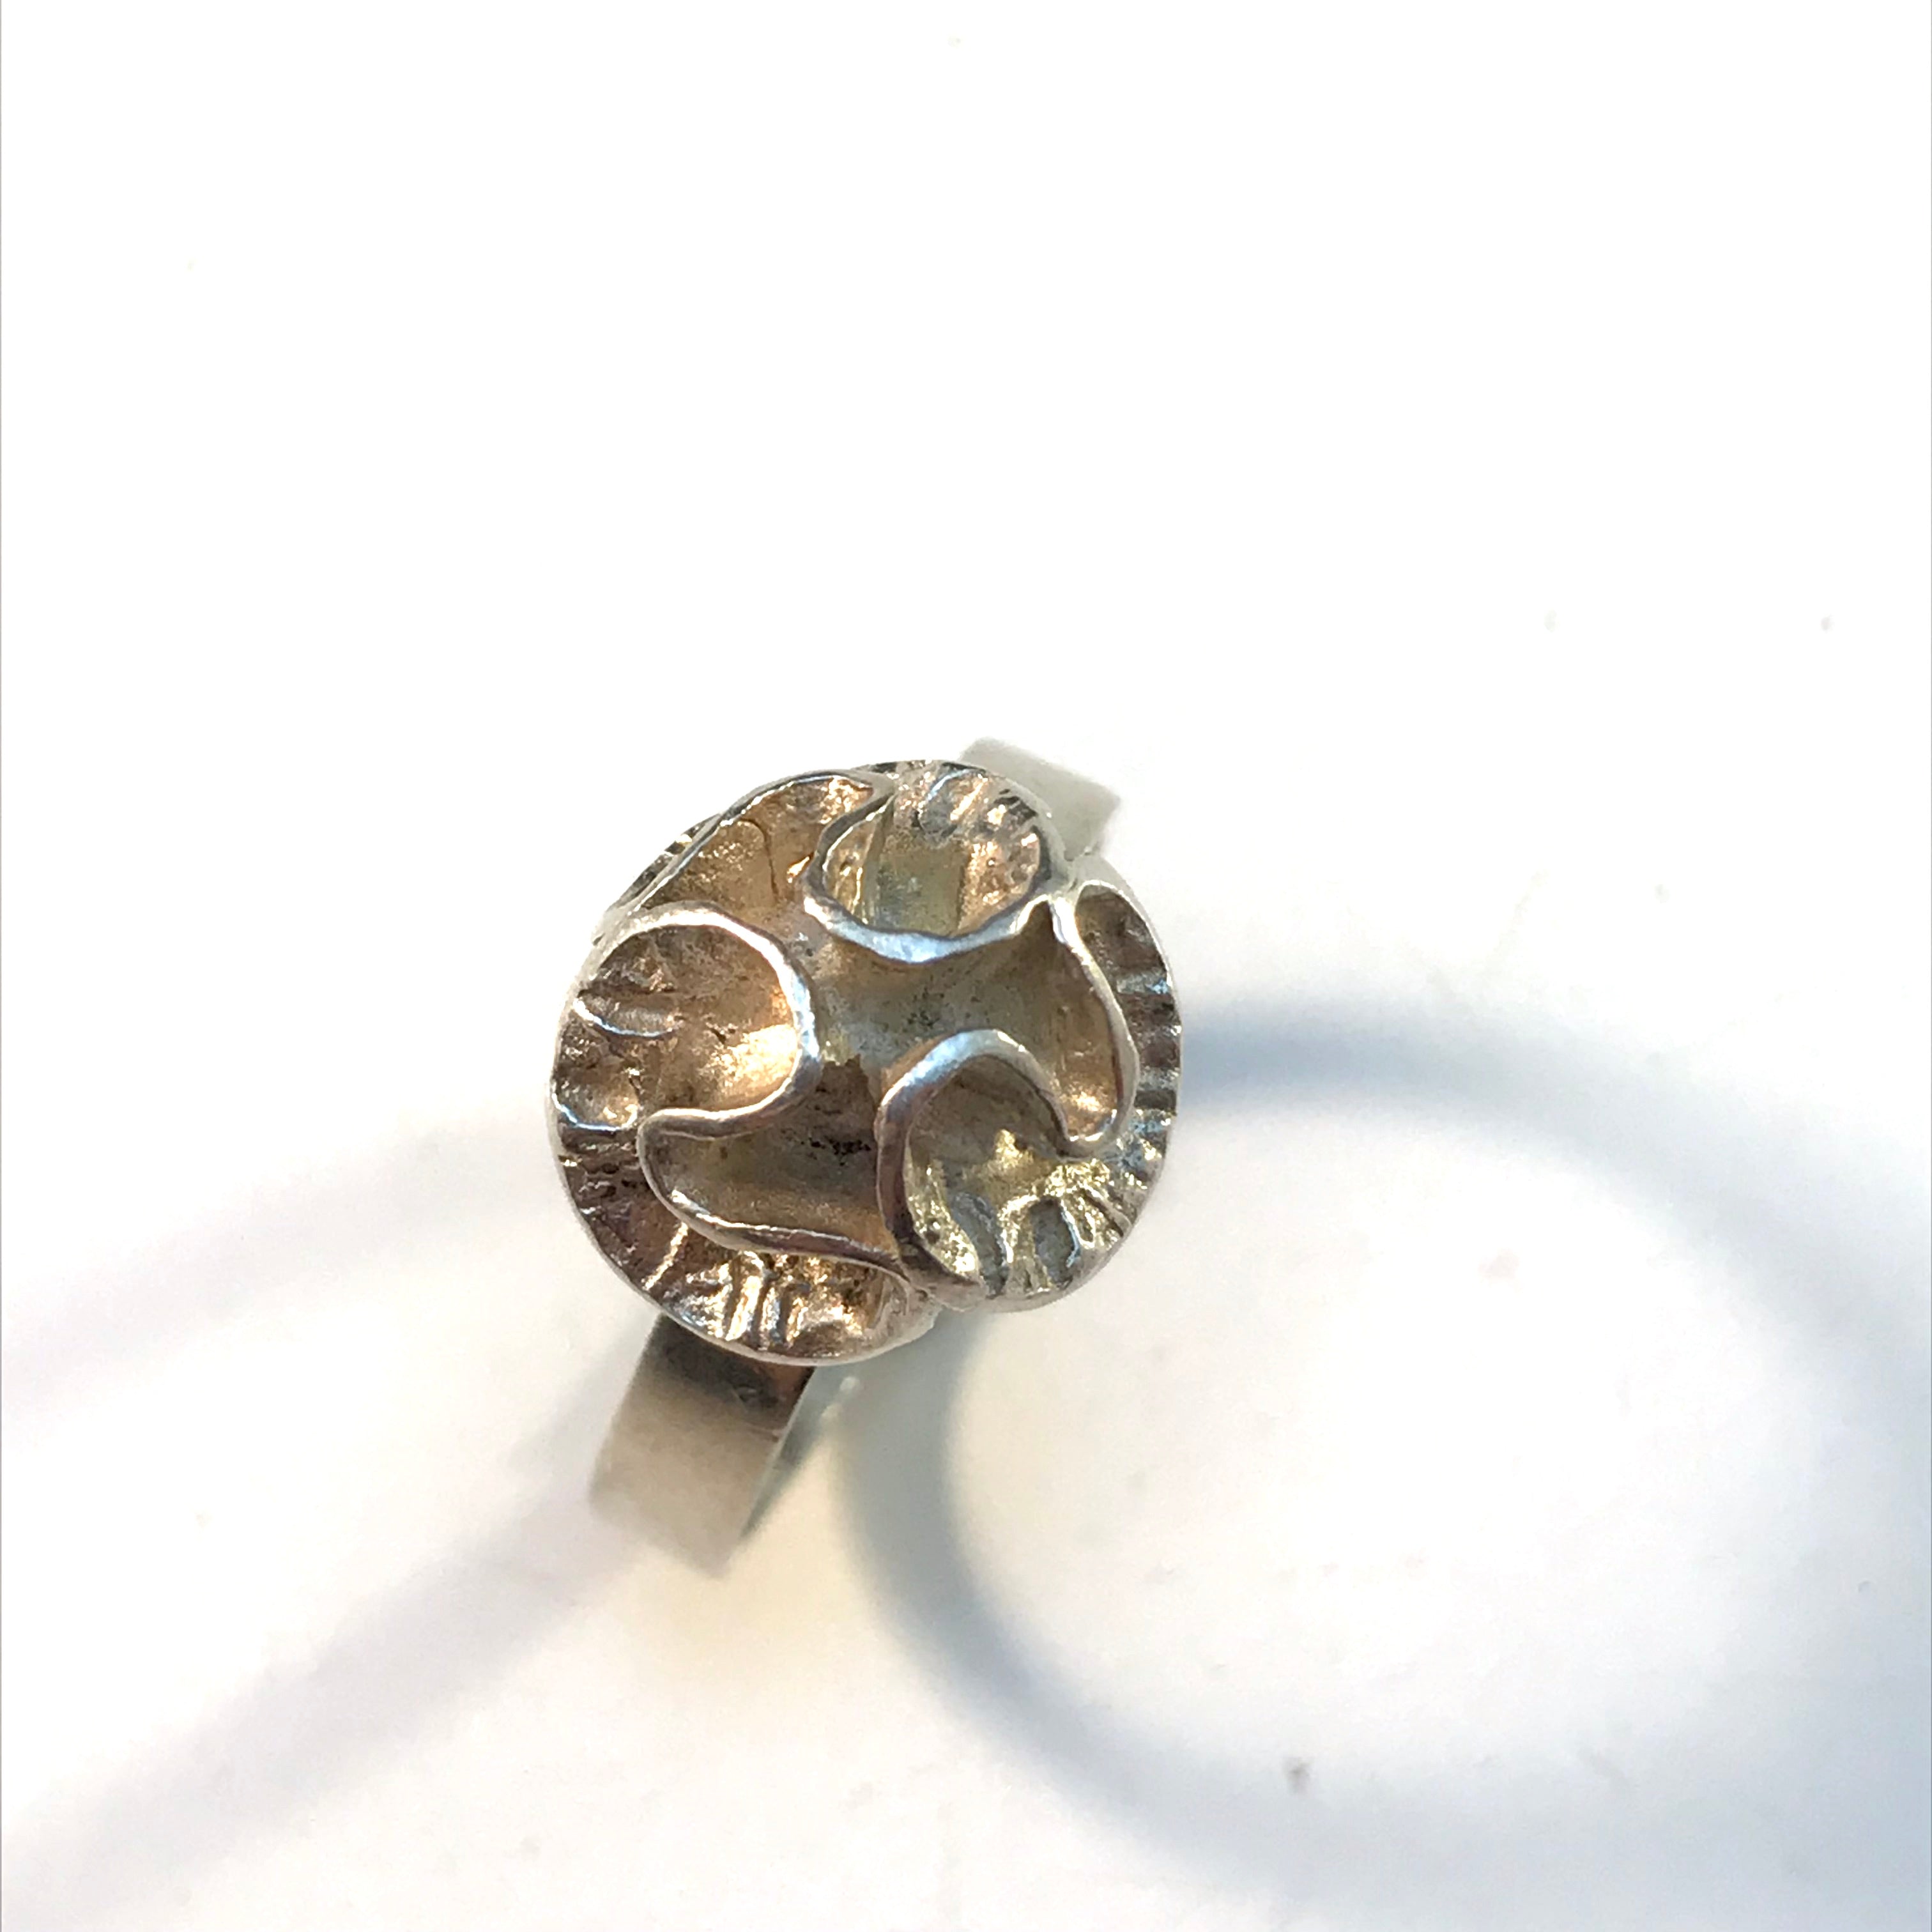 Theresia Hvorslev Sweden 1978 Sterling Silver Water Lilly Ring. Signed